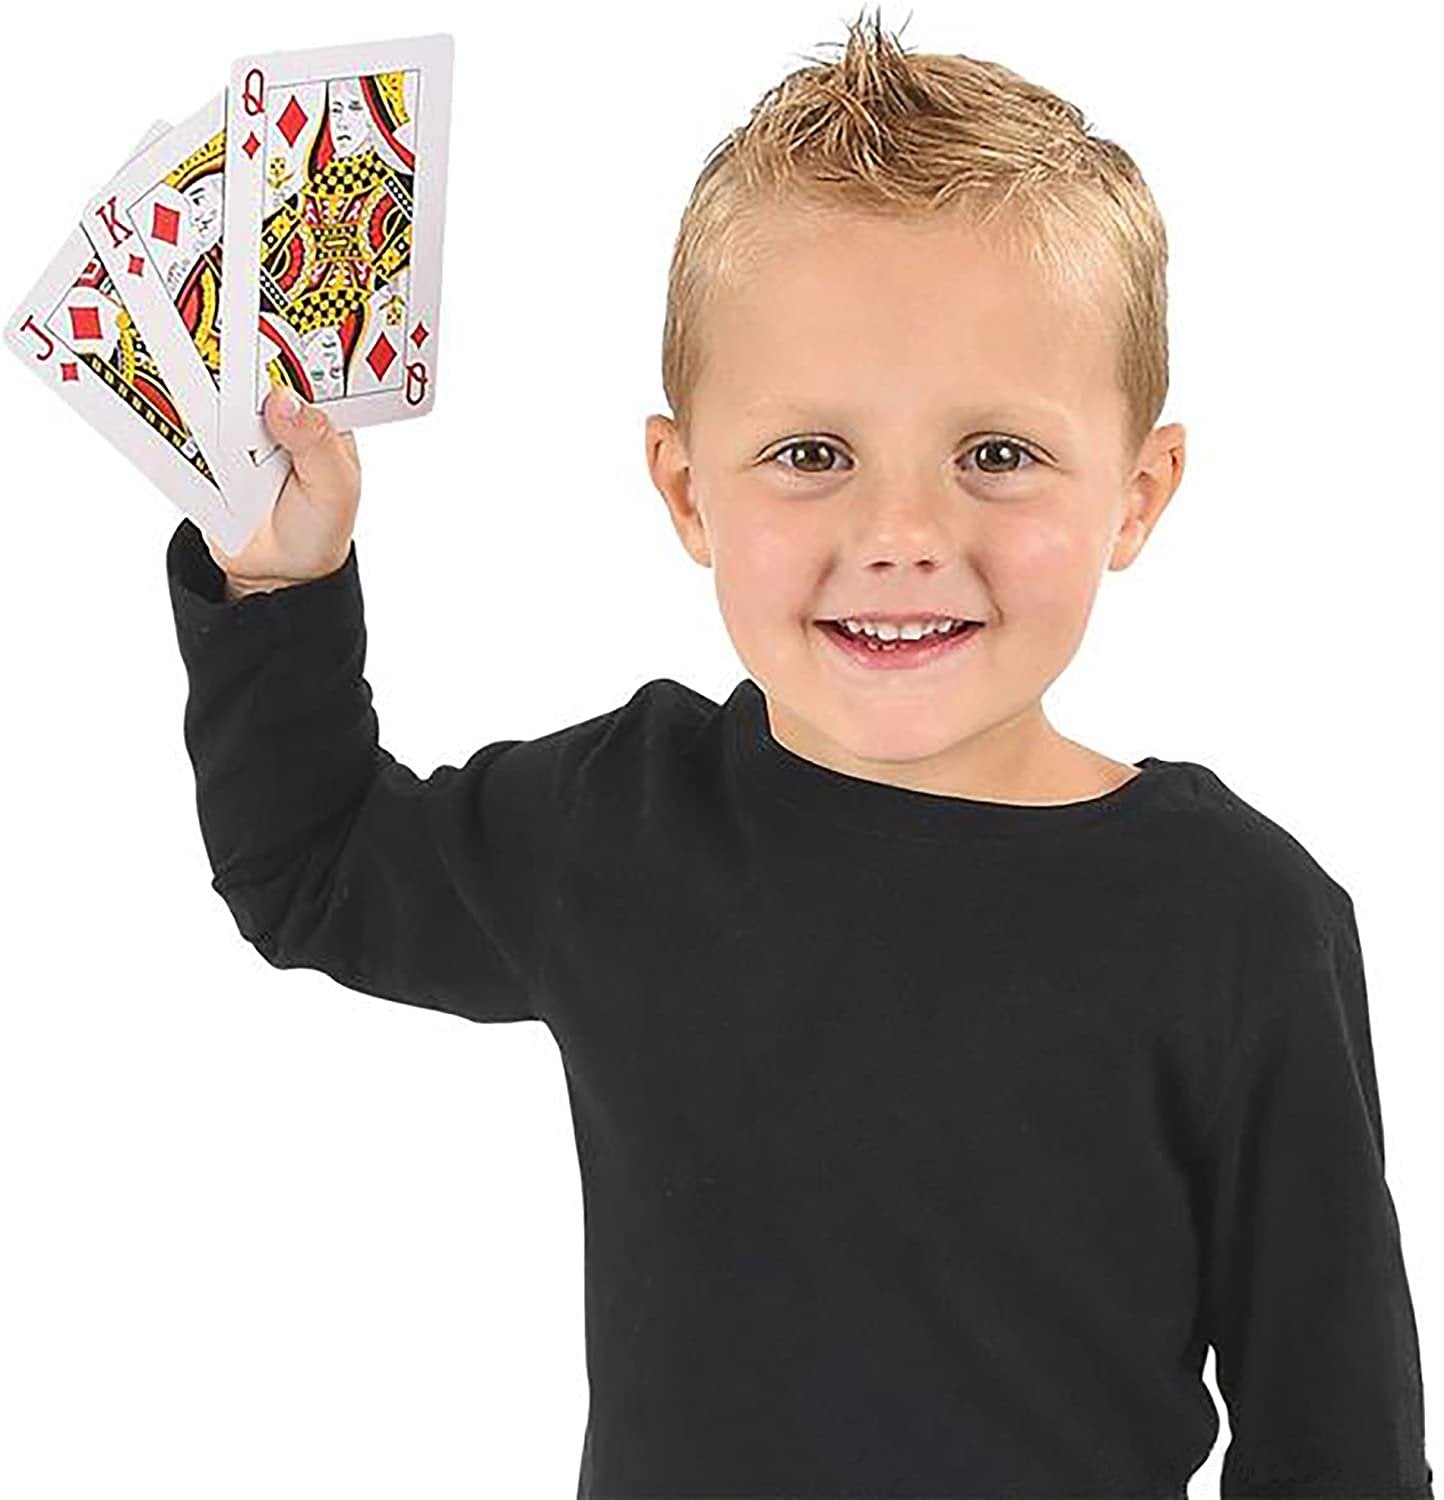 Gamie Jumbo Playing Cards Deck - 3"es X 5"es - Oversized Big Poker Card Set - Huge Casino Game Cards for Kids, Men, Women and Seniors - Great Novelty Gift Idea - 1 Pack